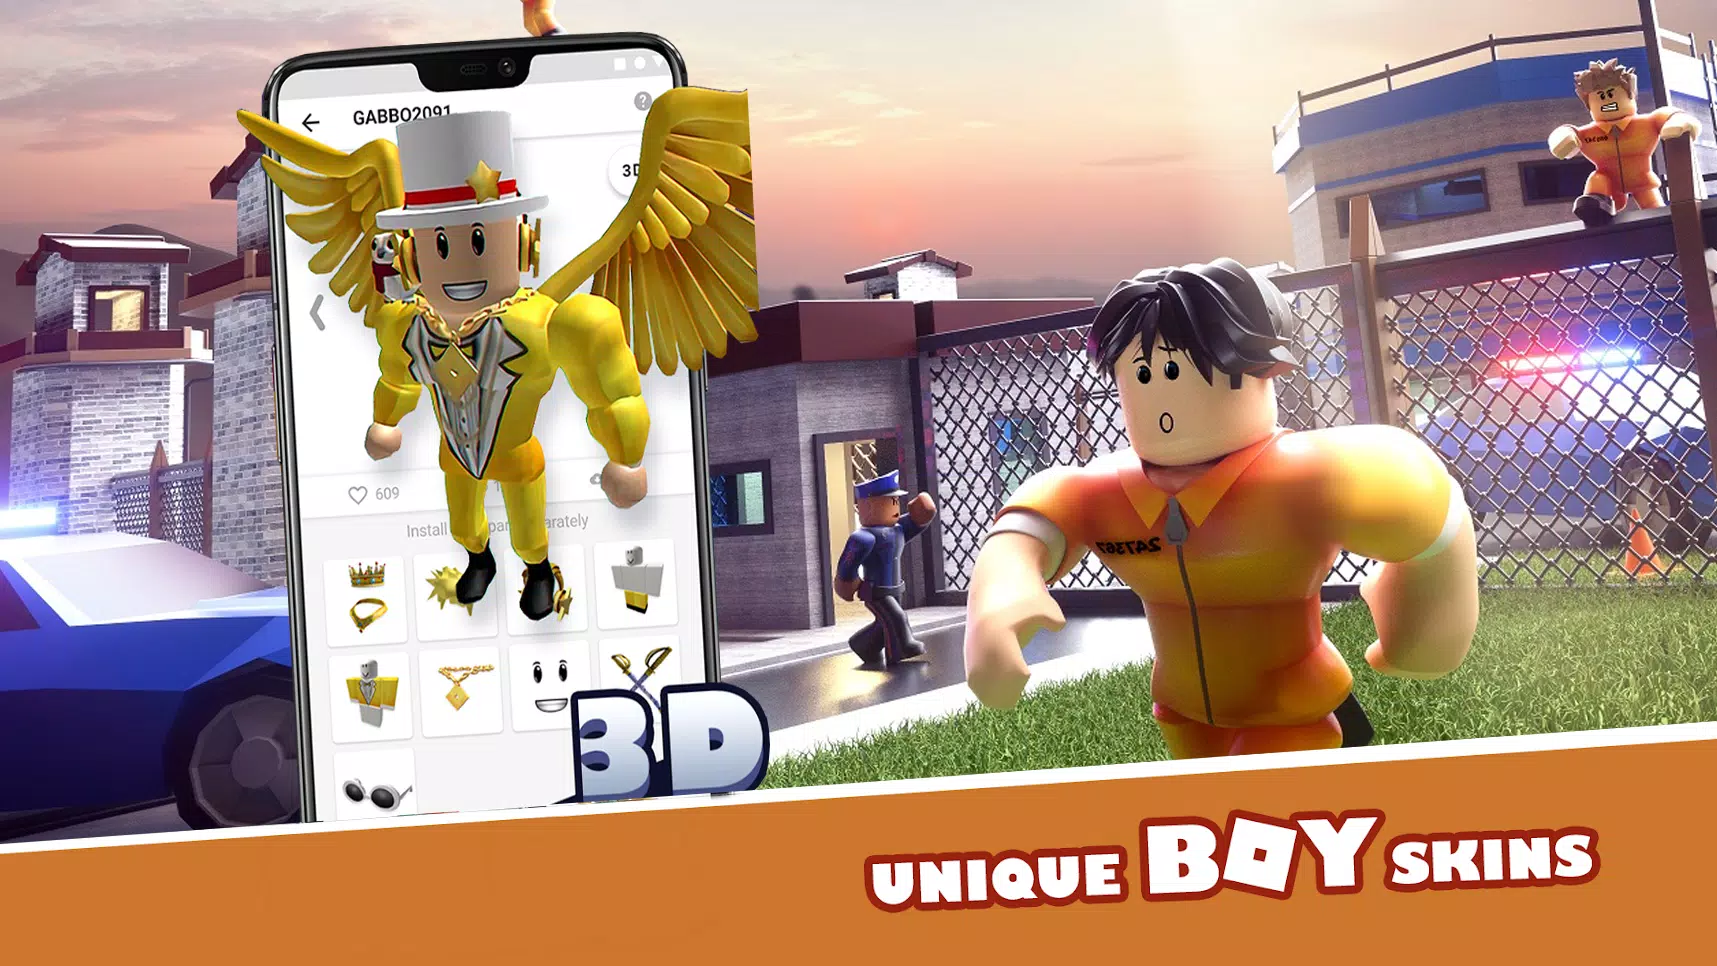 Skins Master for Roblox Shirts APK for Android Download